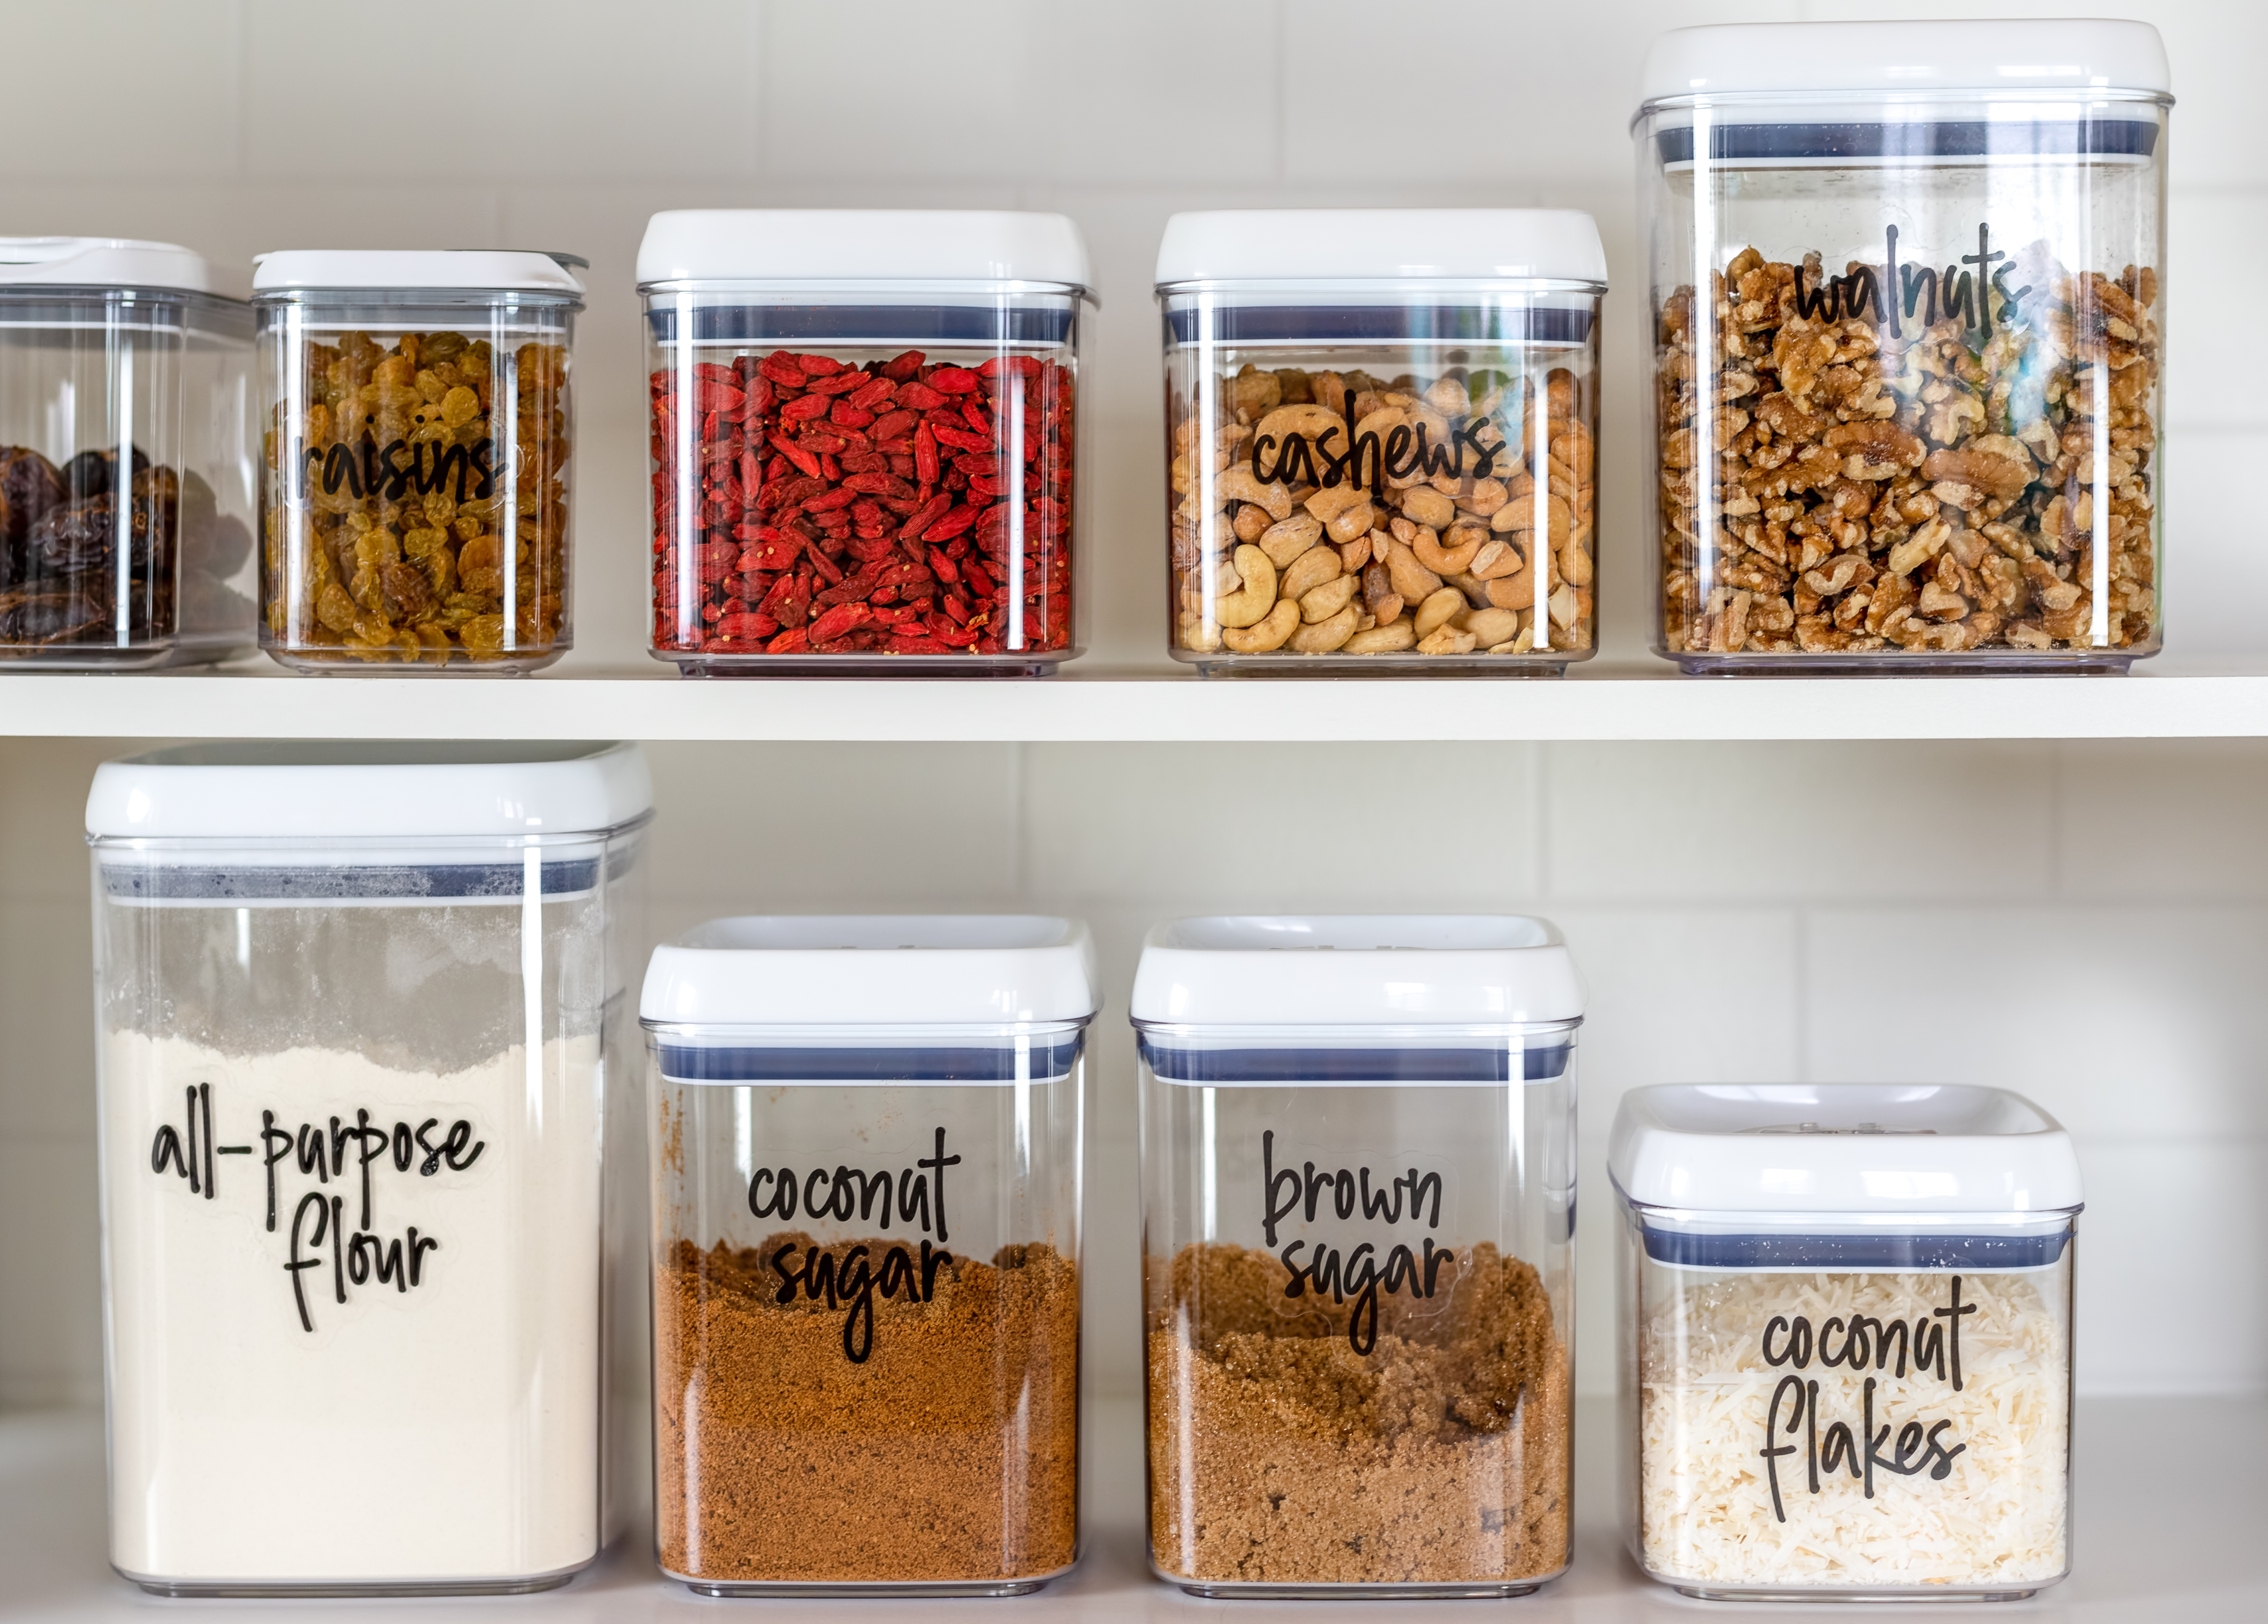 Neatly organized and labeled baking ingredients